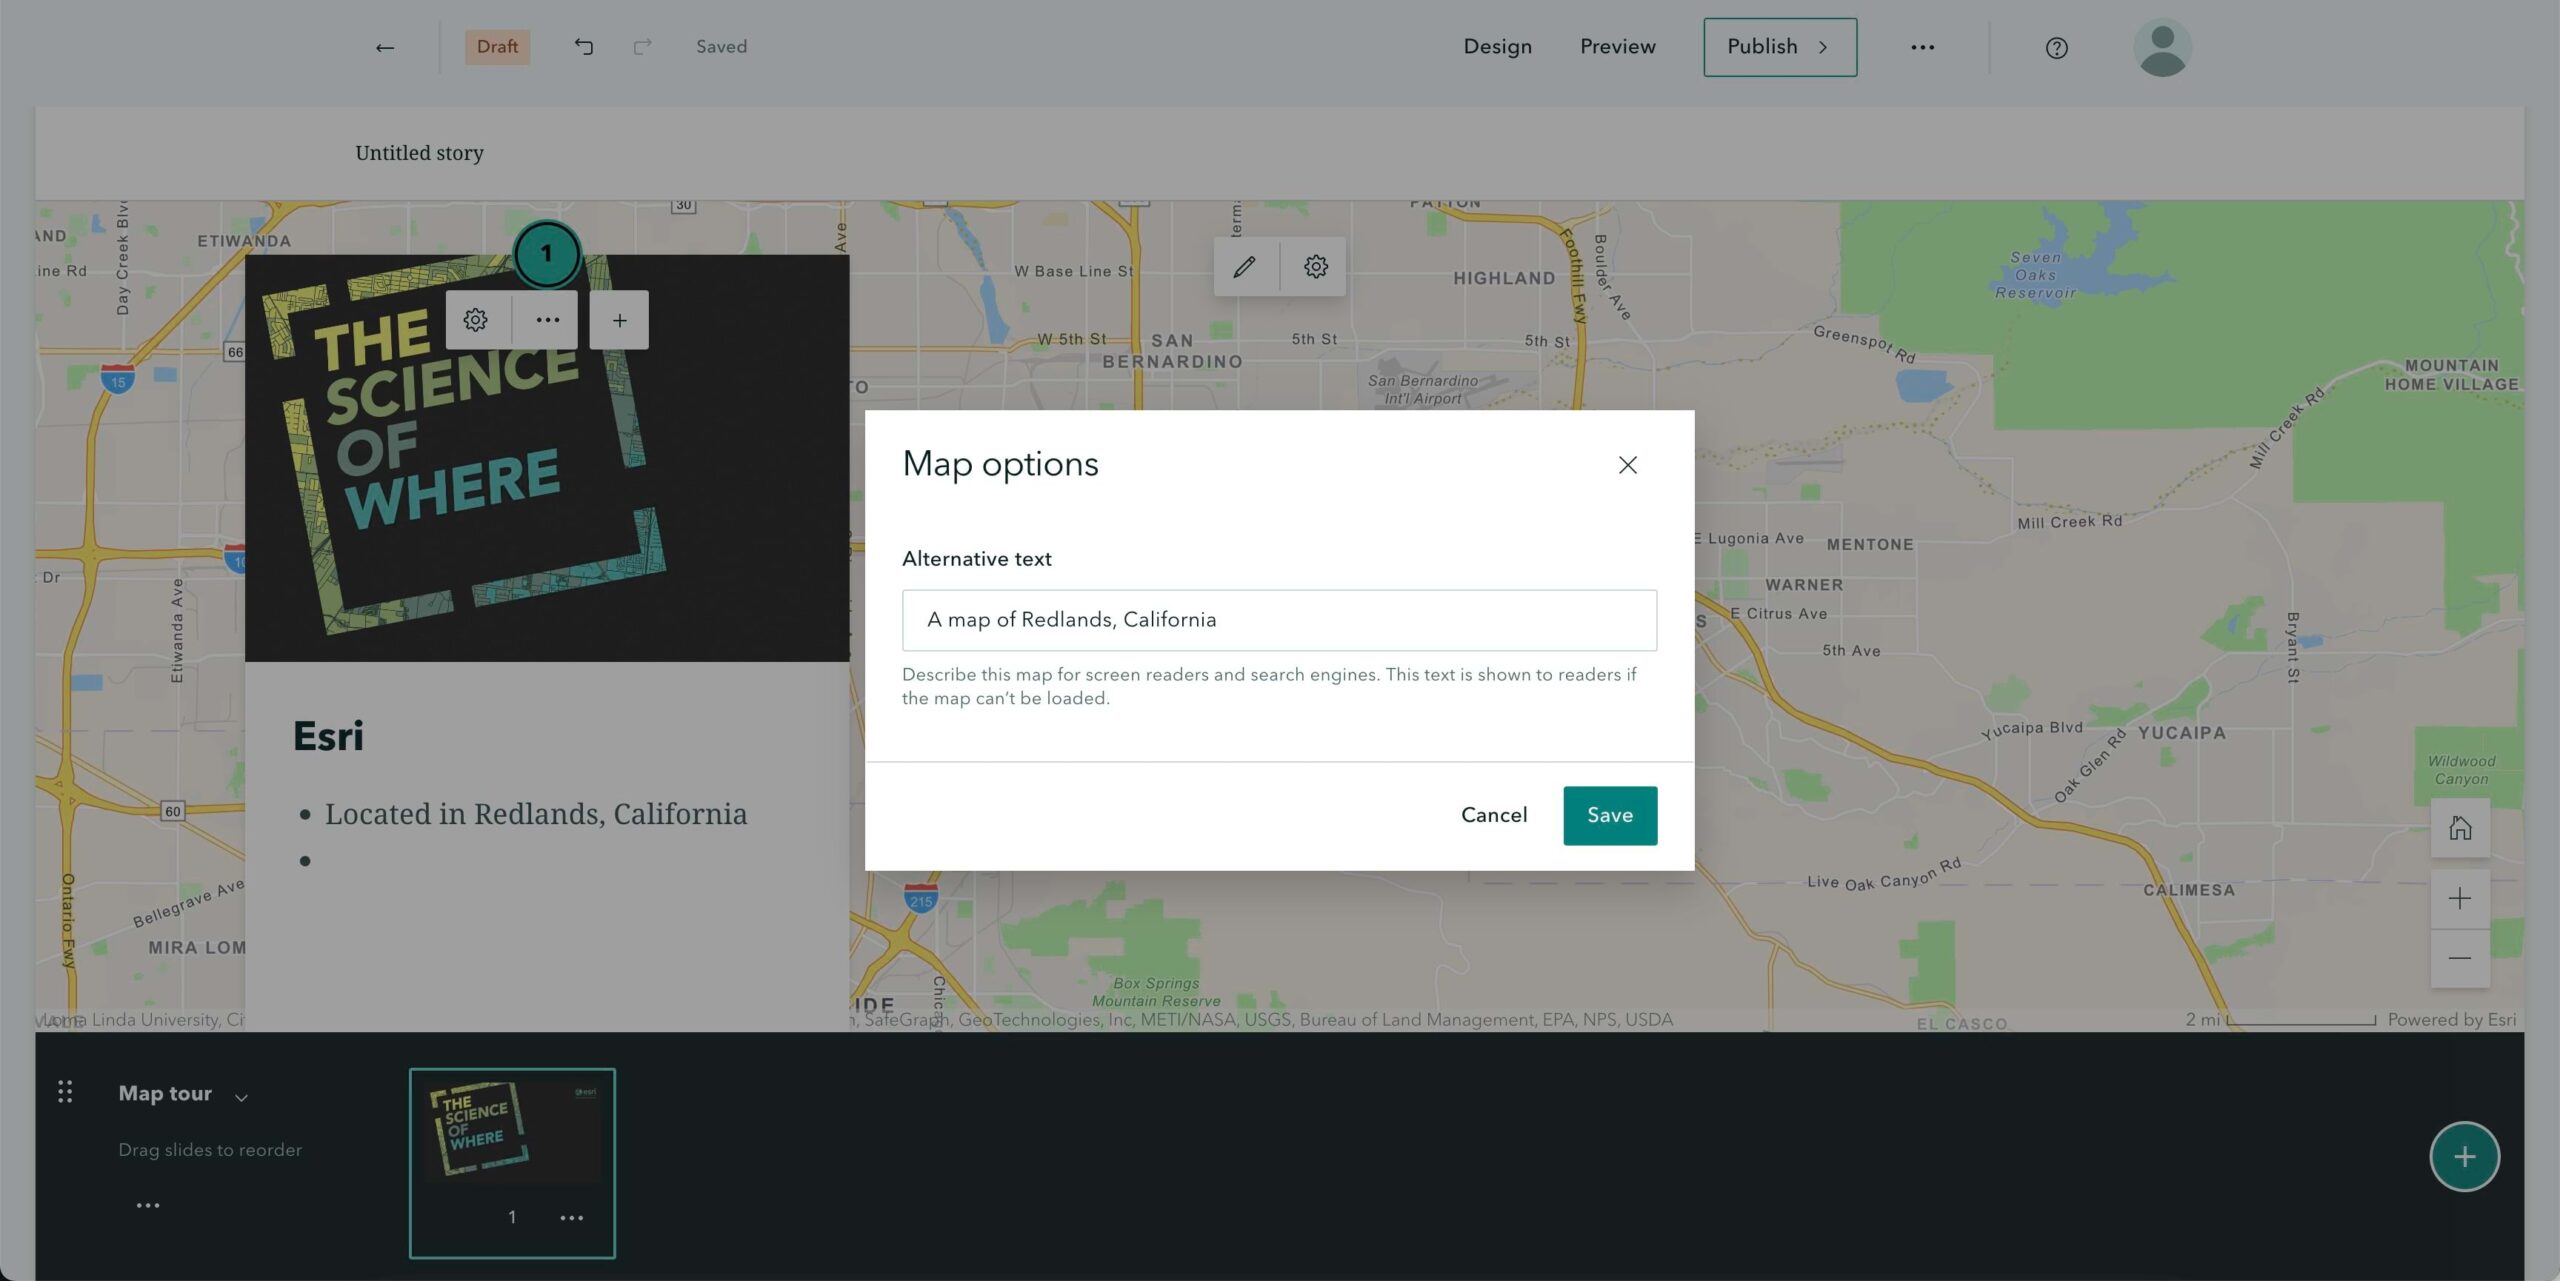 The place to add alternative text is shown in the ArcGIS StoryMaps user interface.